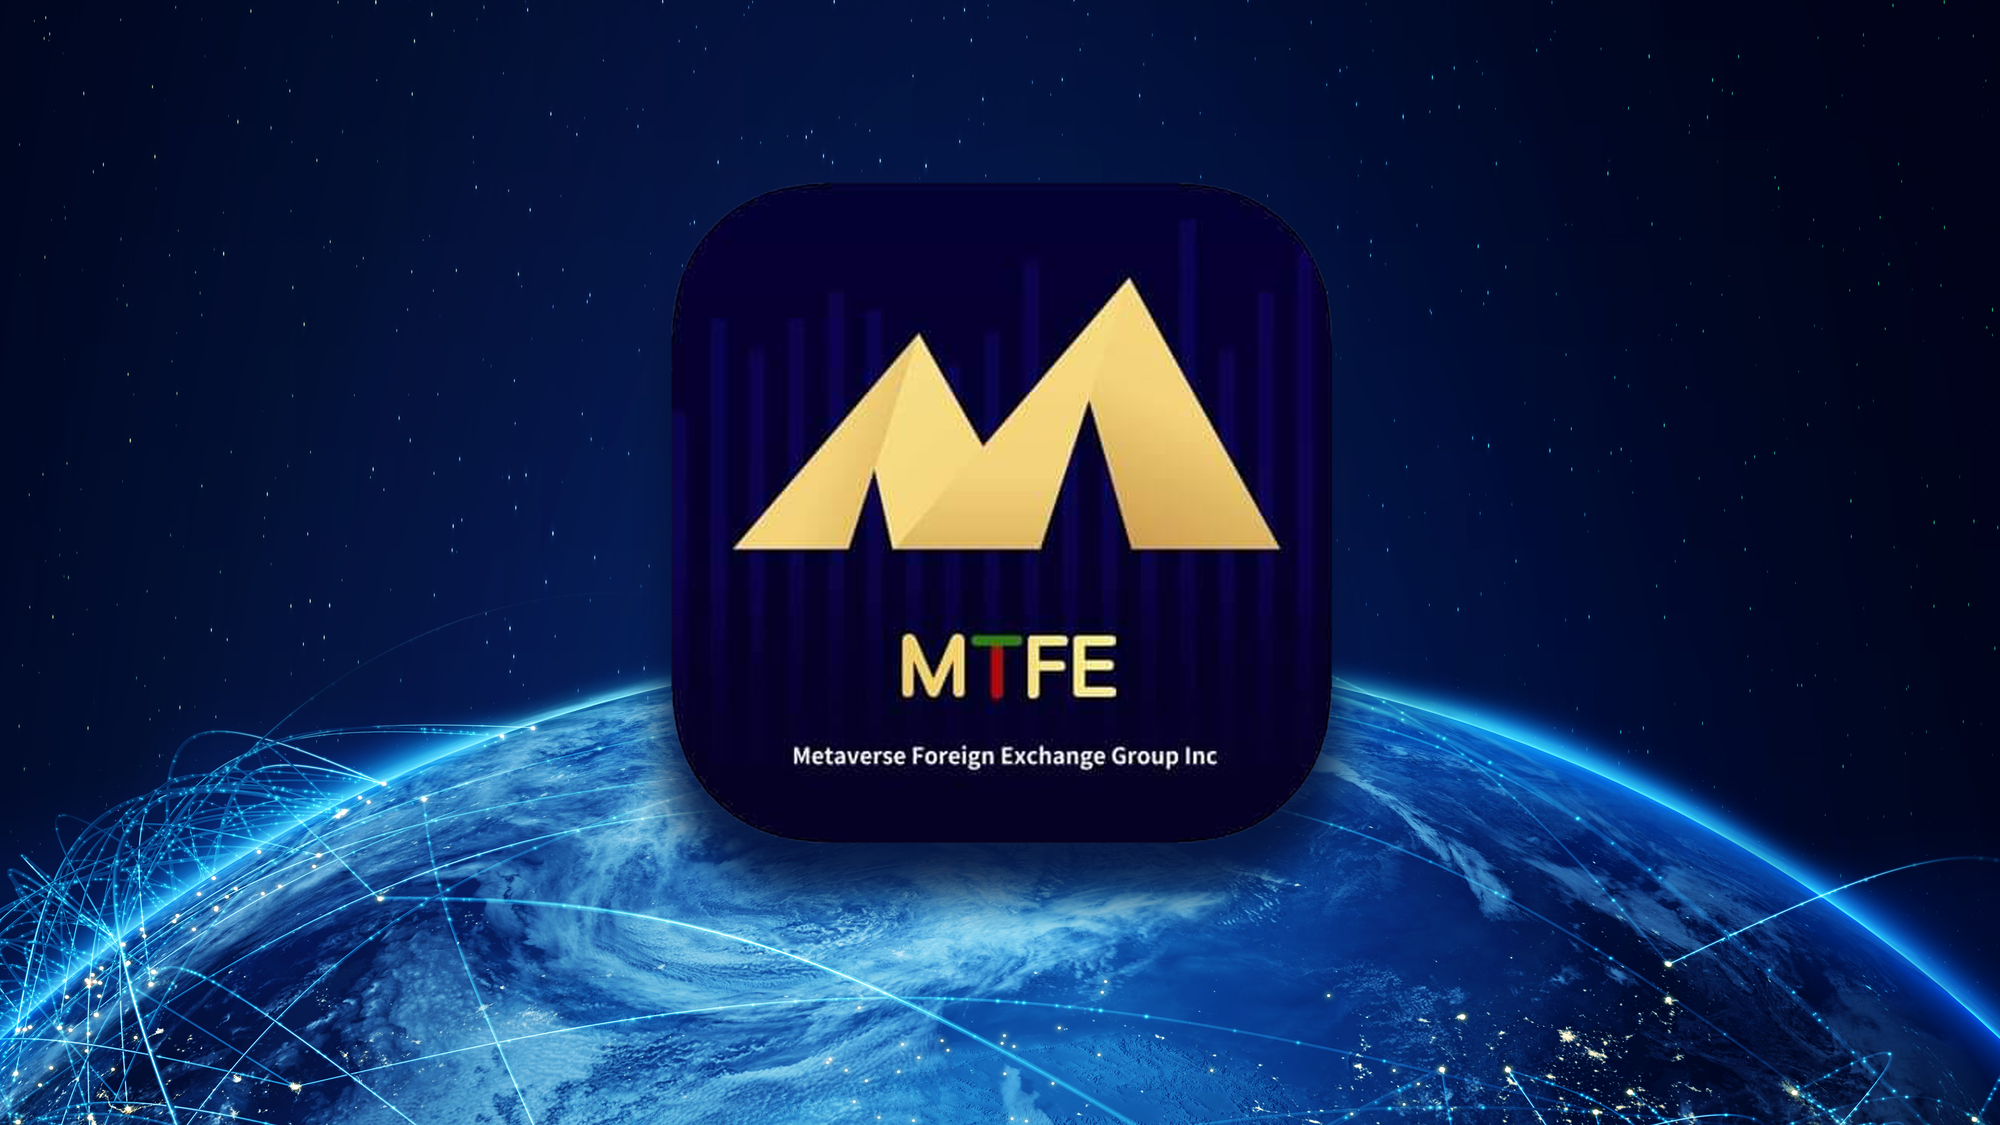 A large yellow logo centred around a capital "M" is shown in front of a blue outline of a globe.